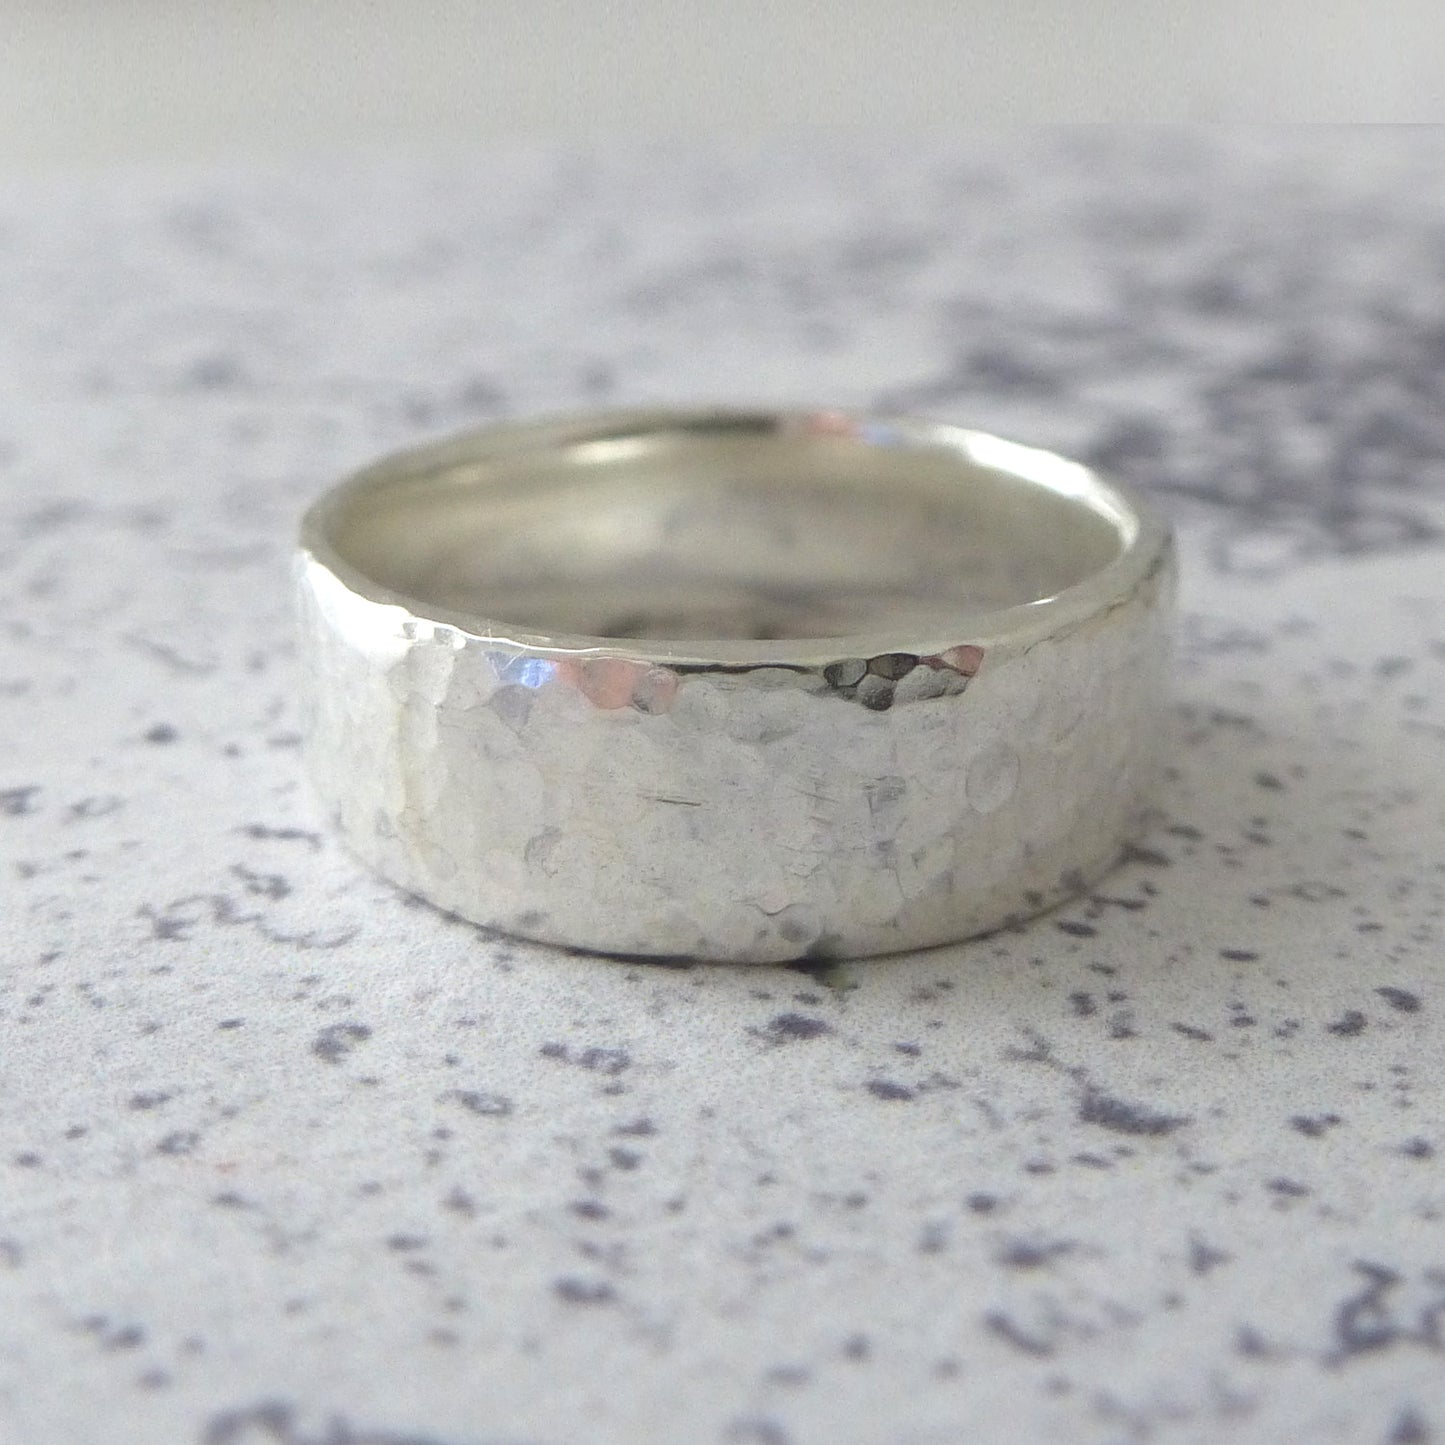 Hand Shaped Band Ring in Sterling Silver - 6mm - Hammered or Smooth